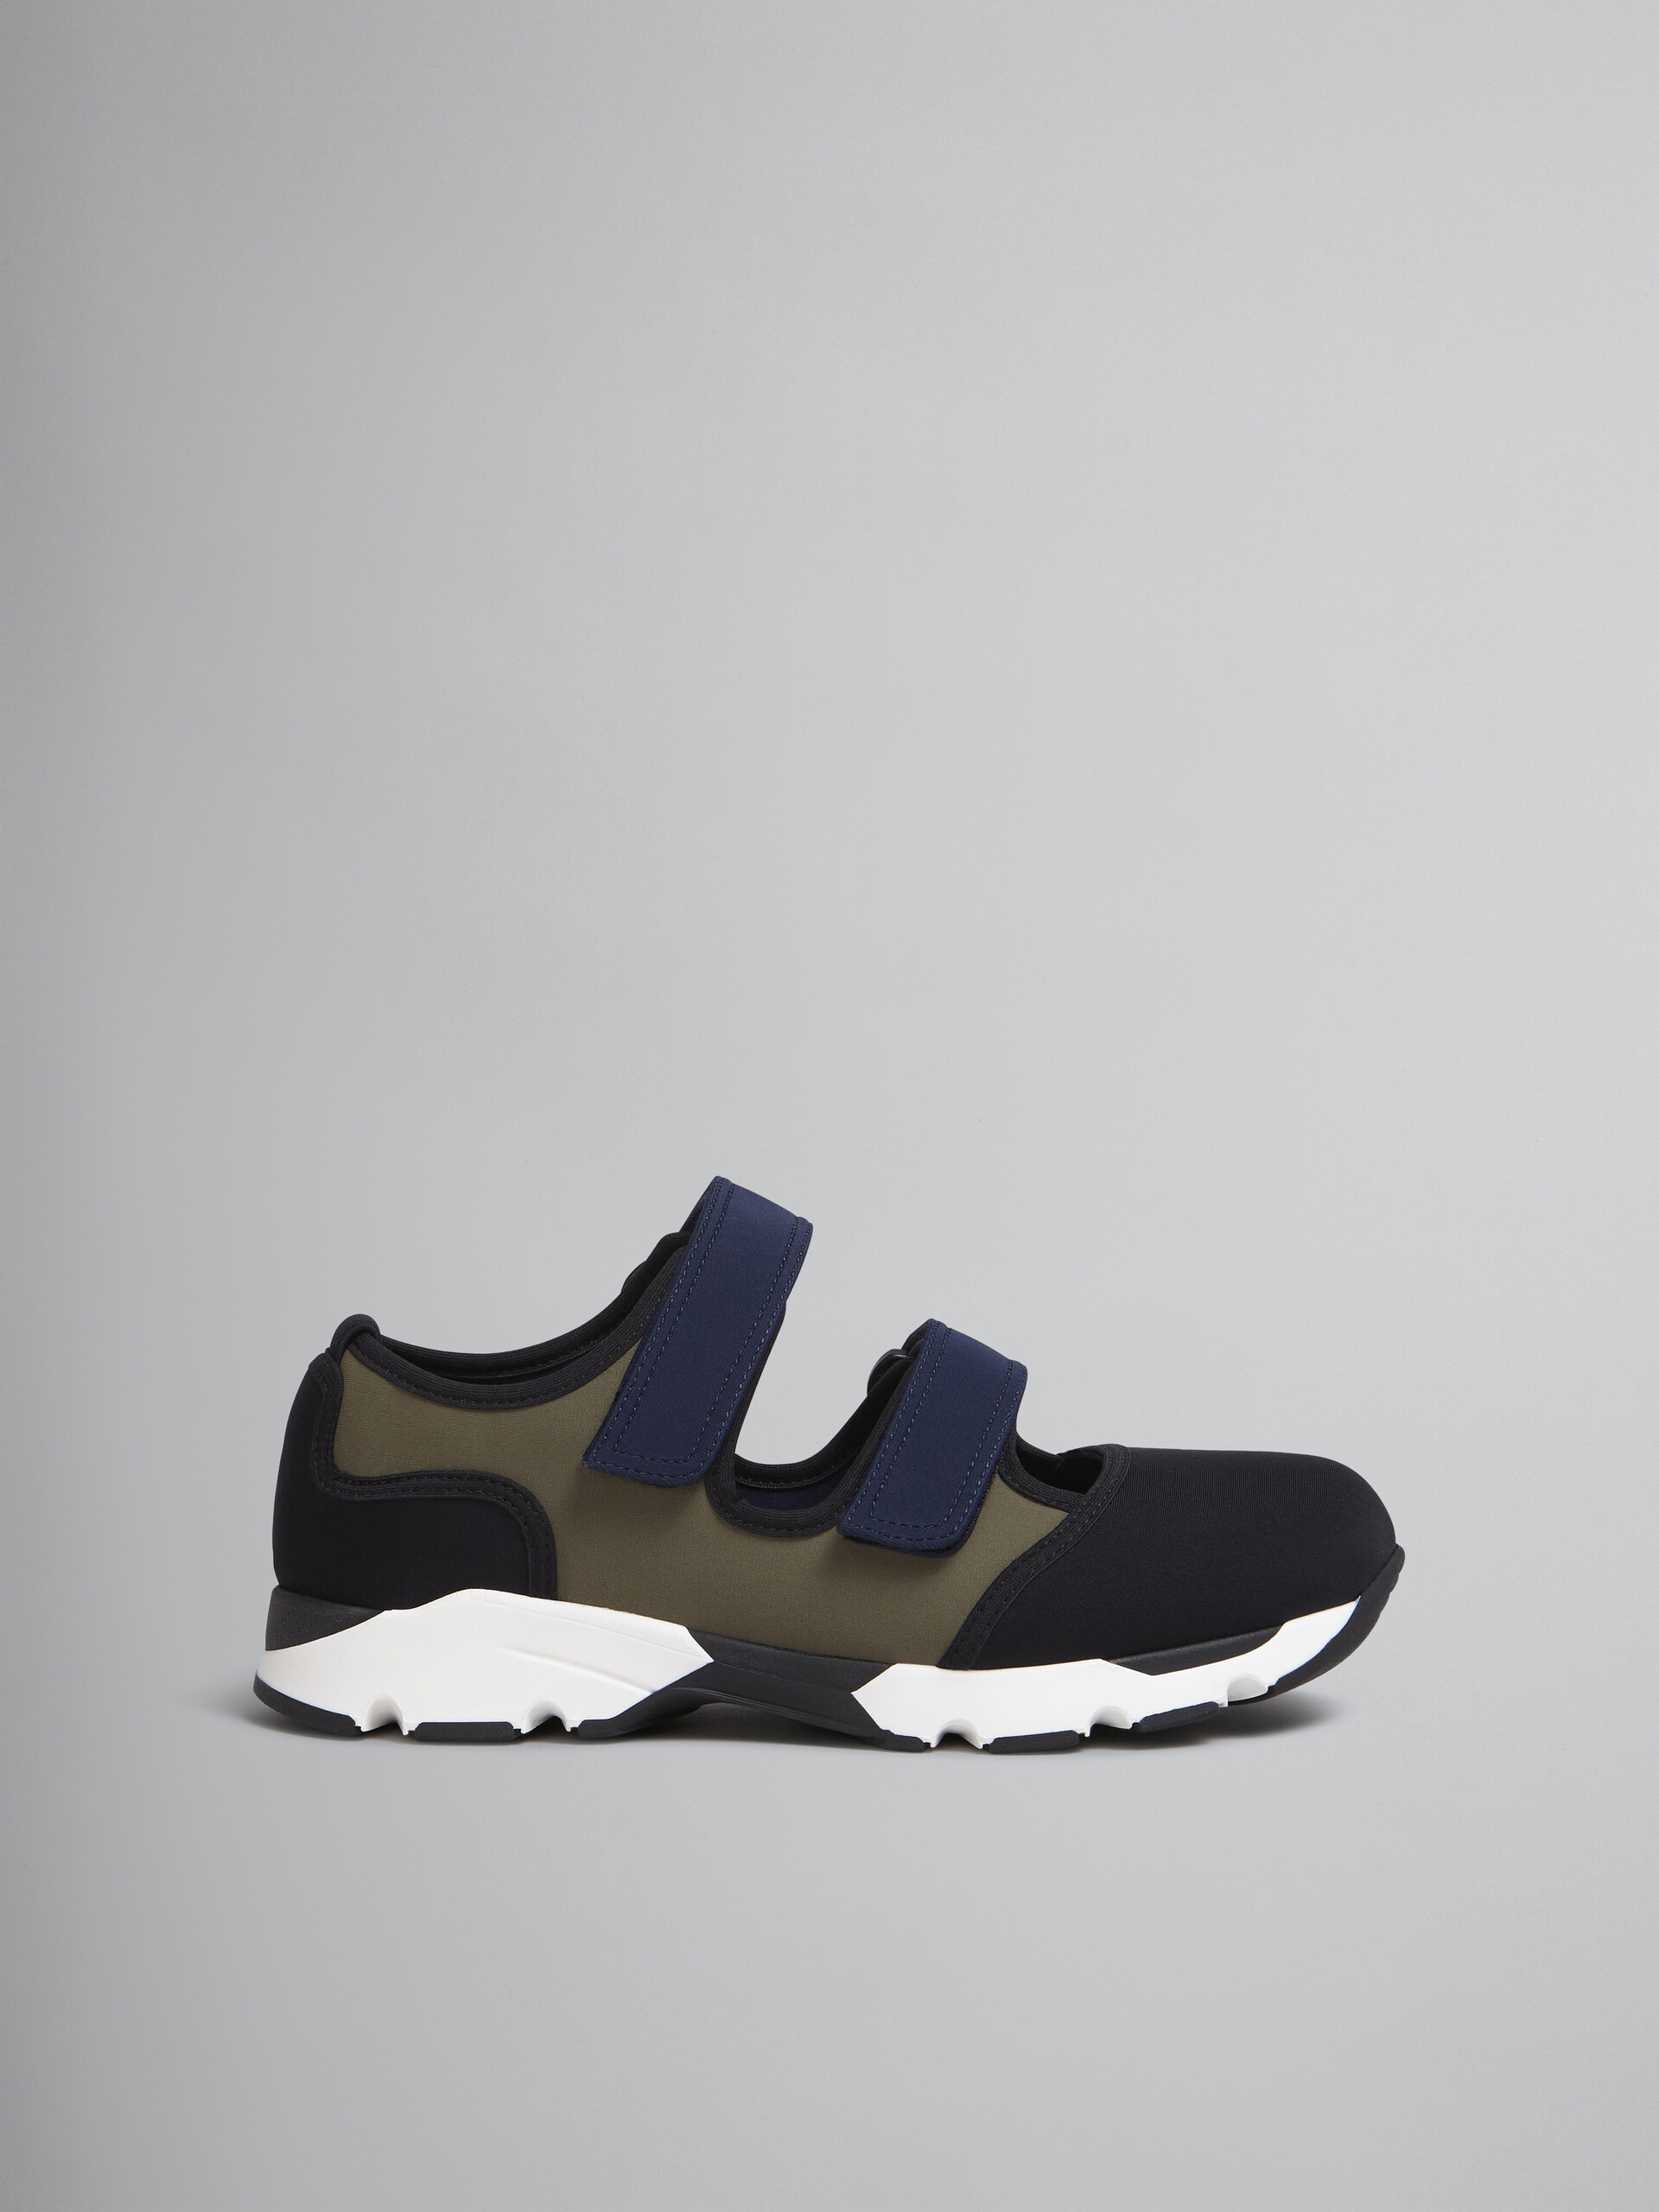 Broom violinist initial Black green and blue techno fabric sneakers | Marni